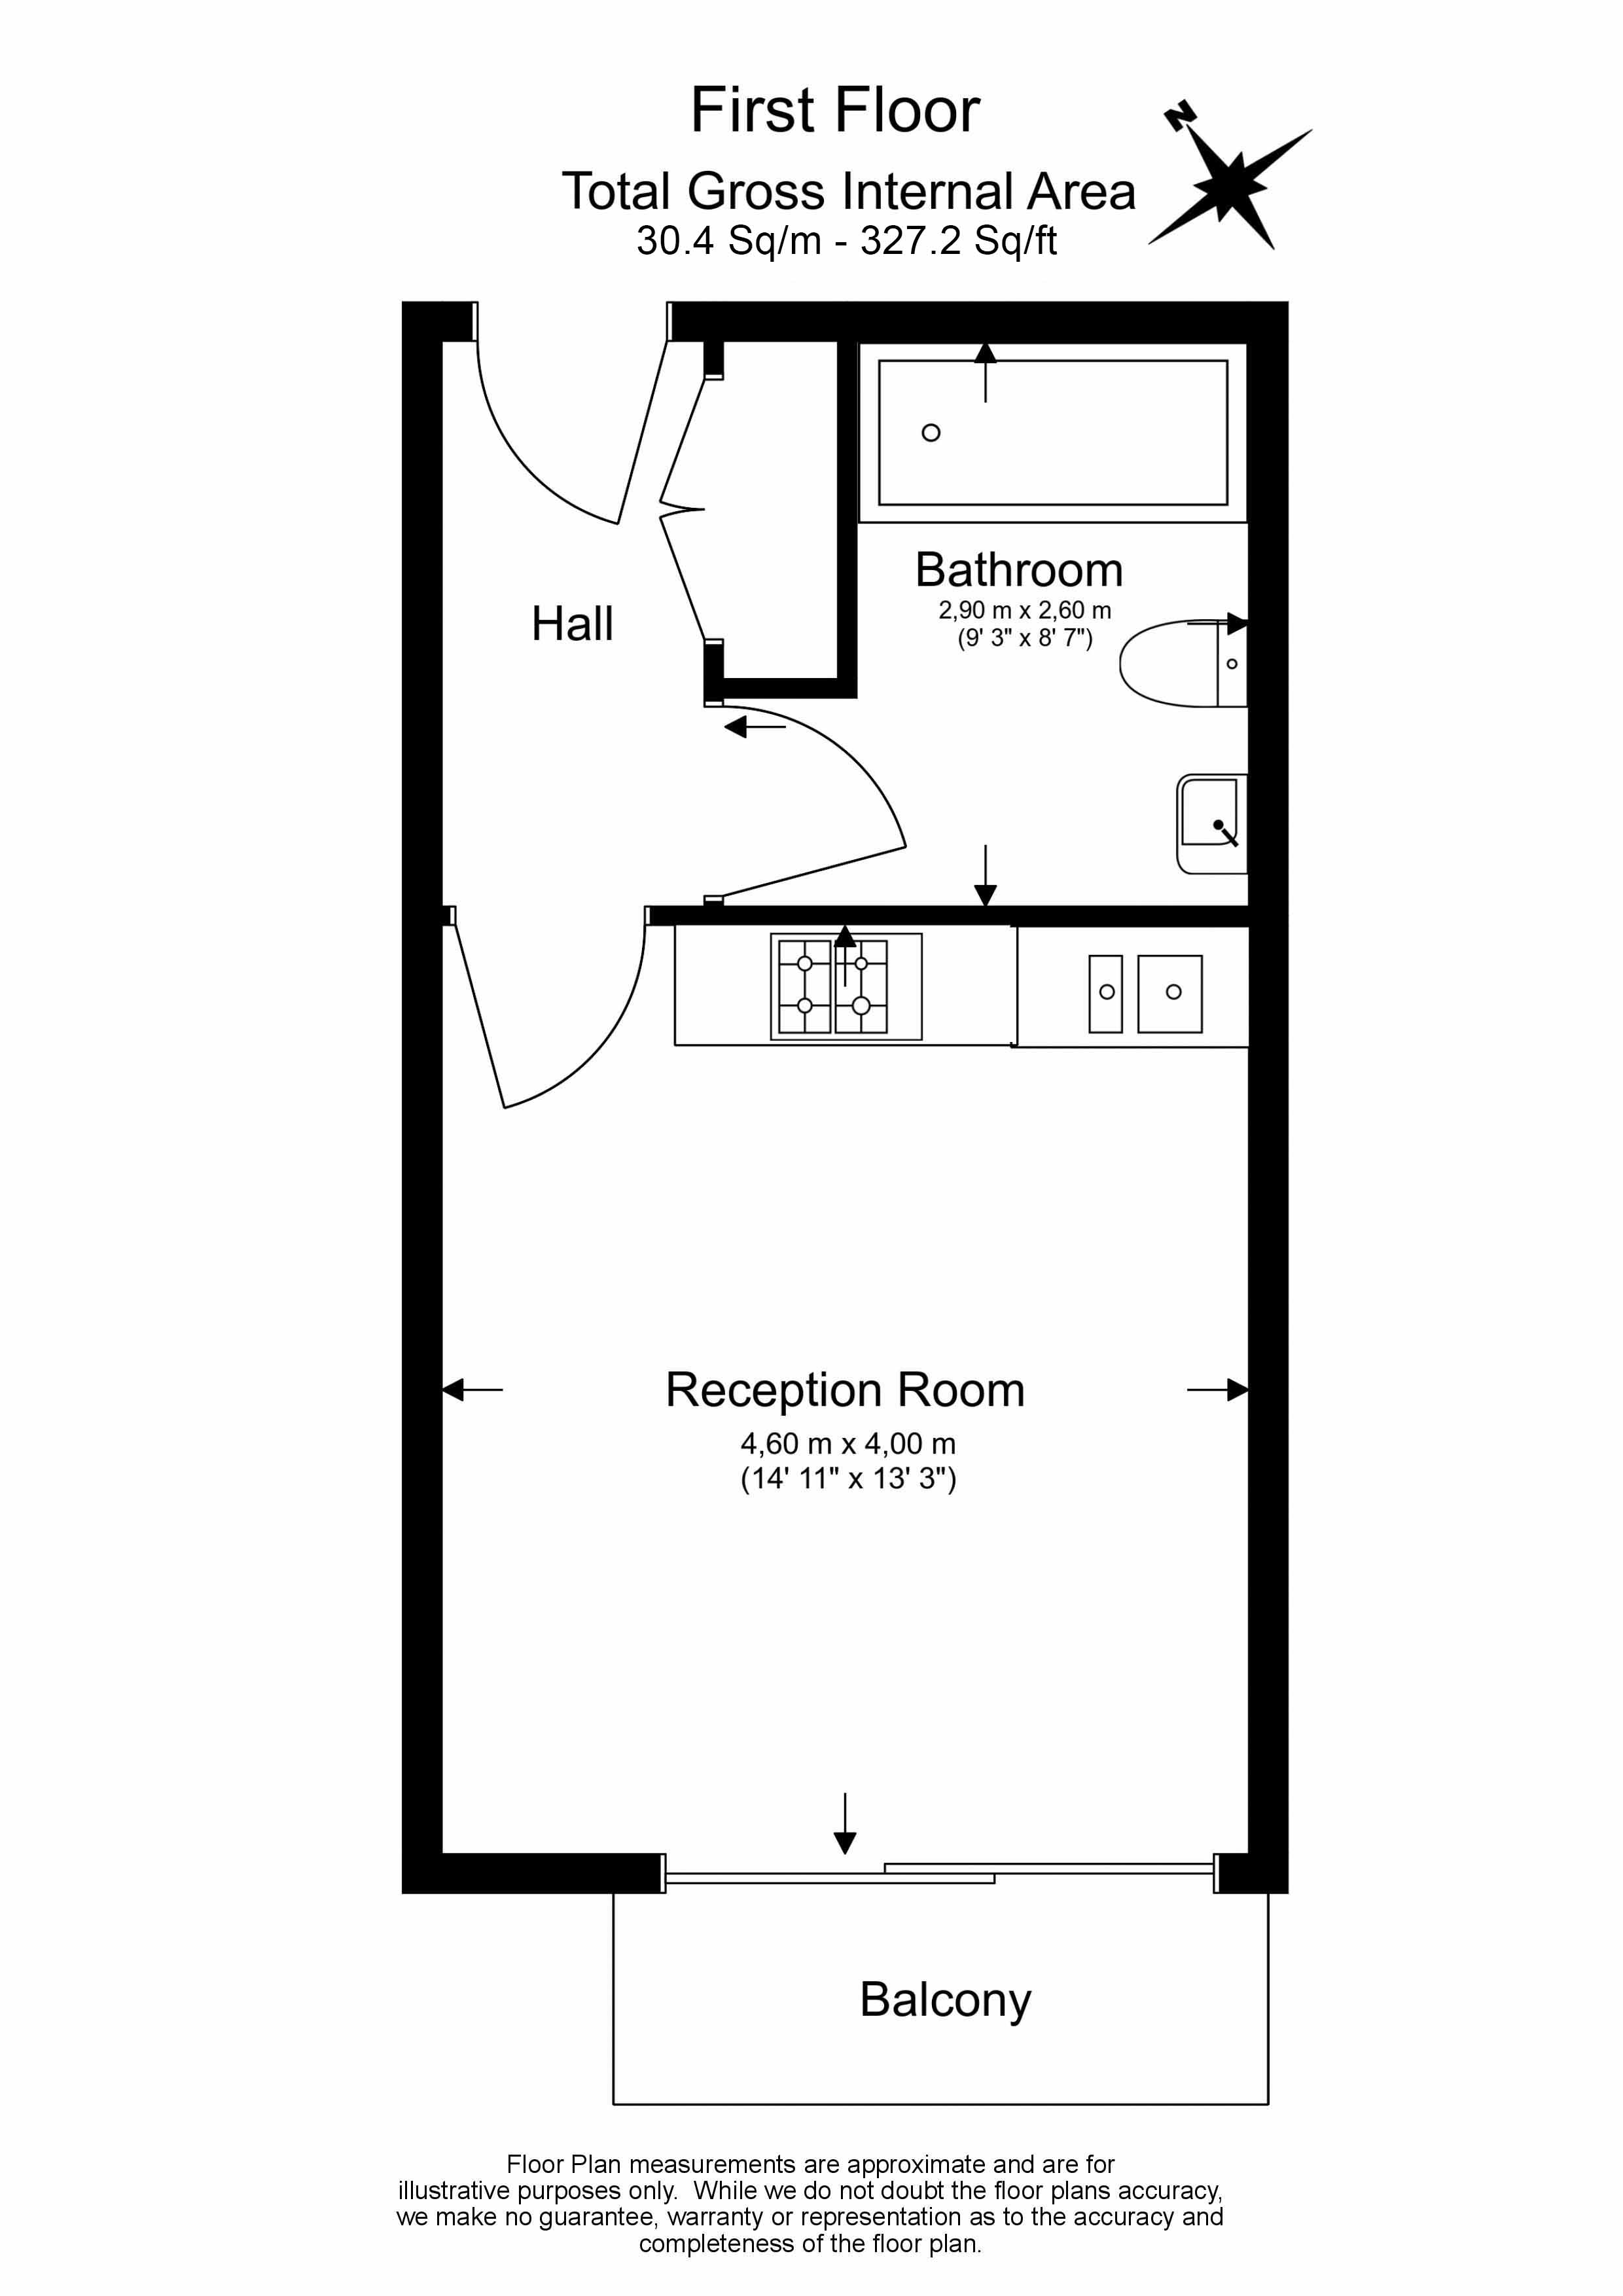 Studio apartments/flats to sale in Yeo Street, Bromley-By- Bow-Floorplan